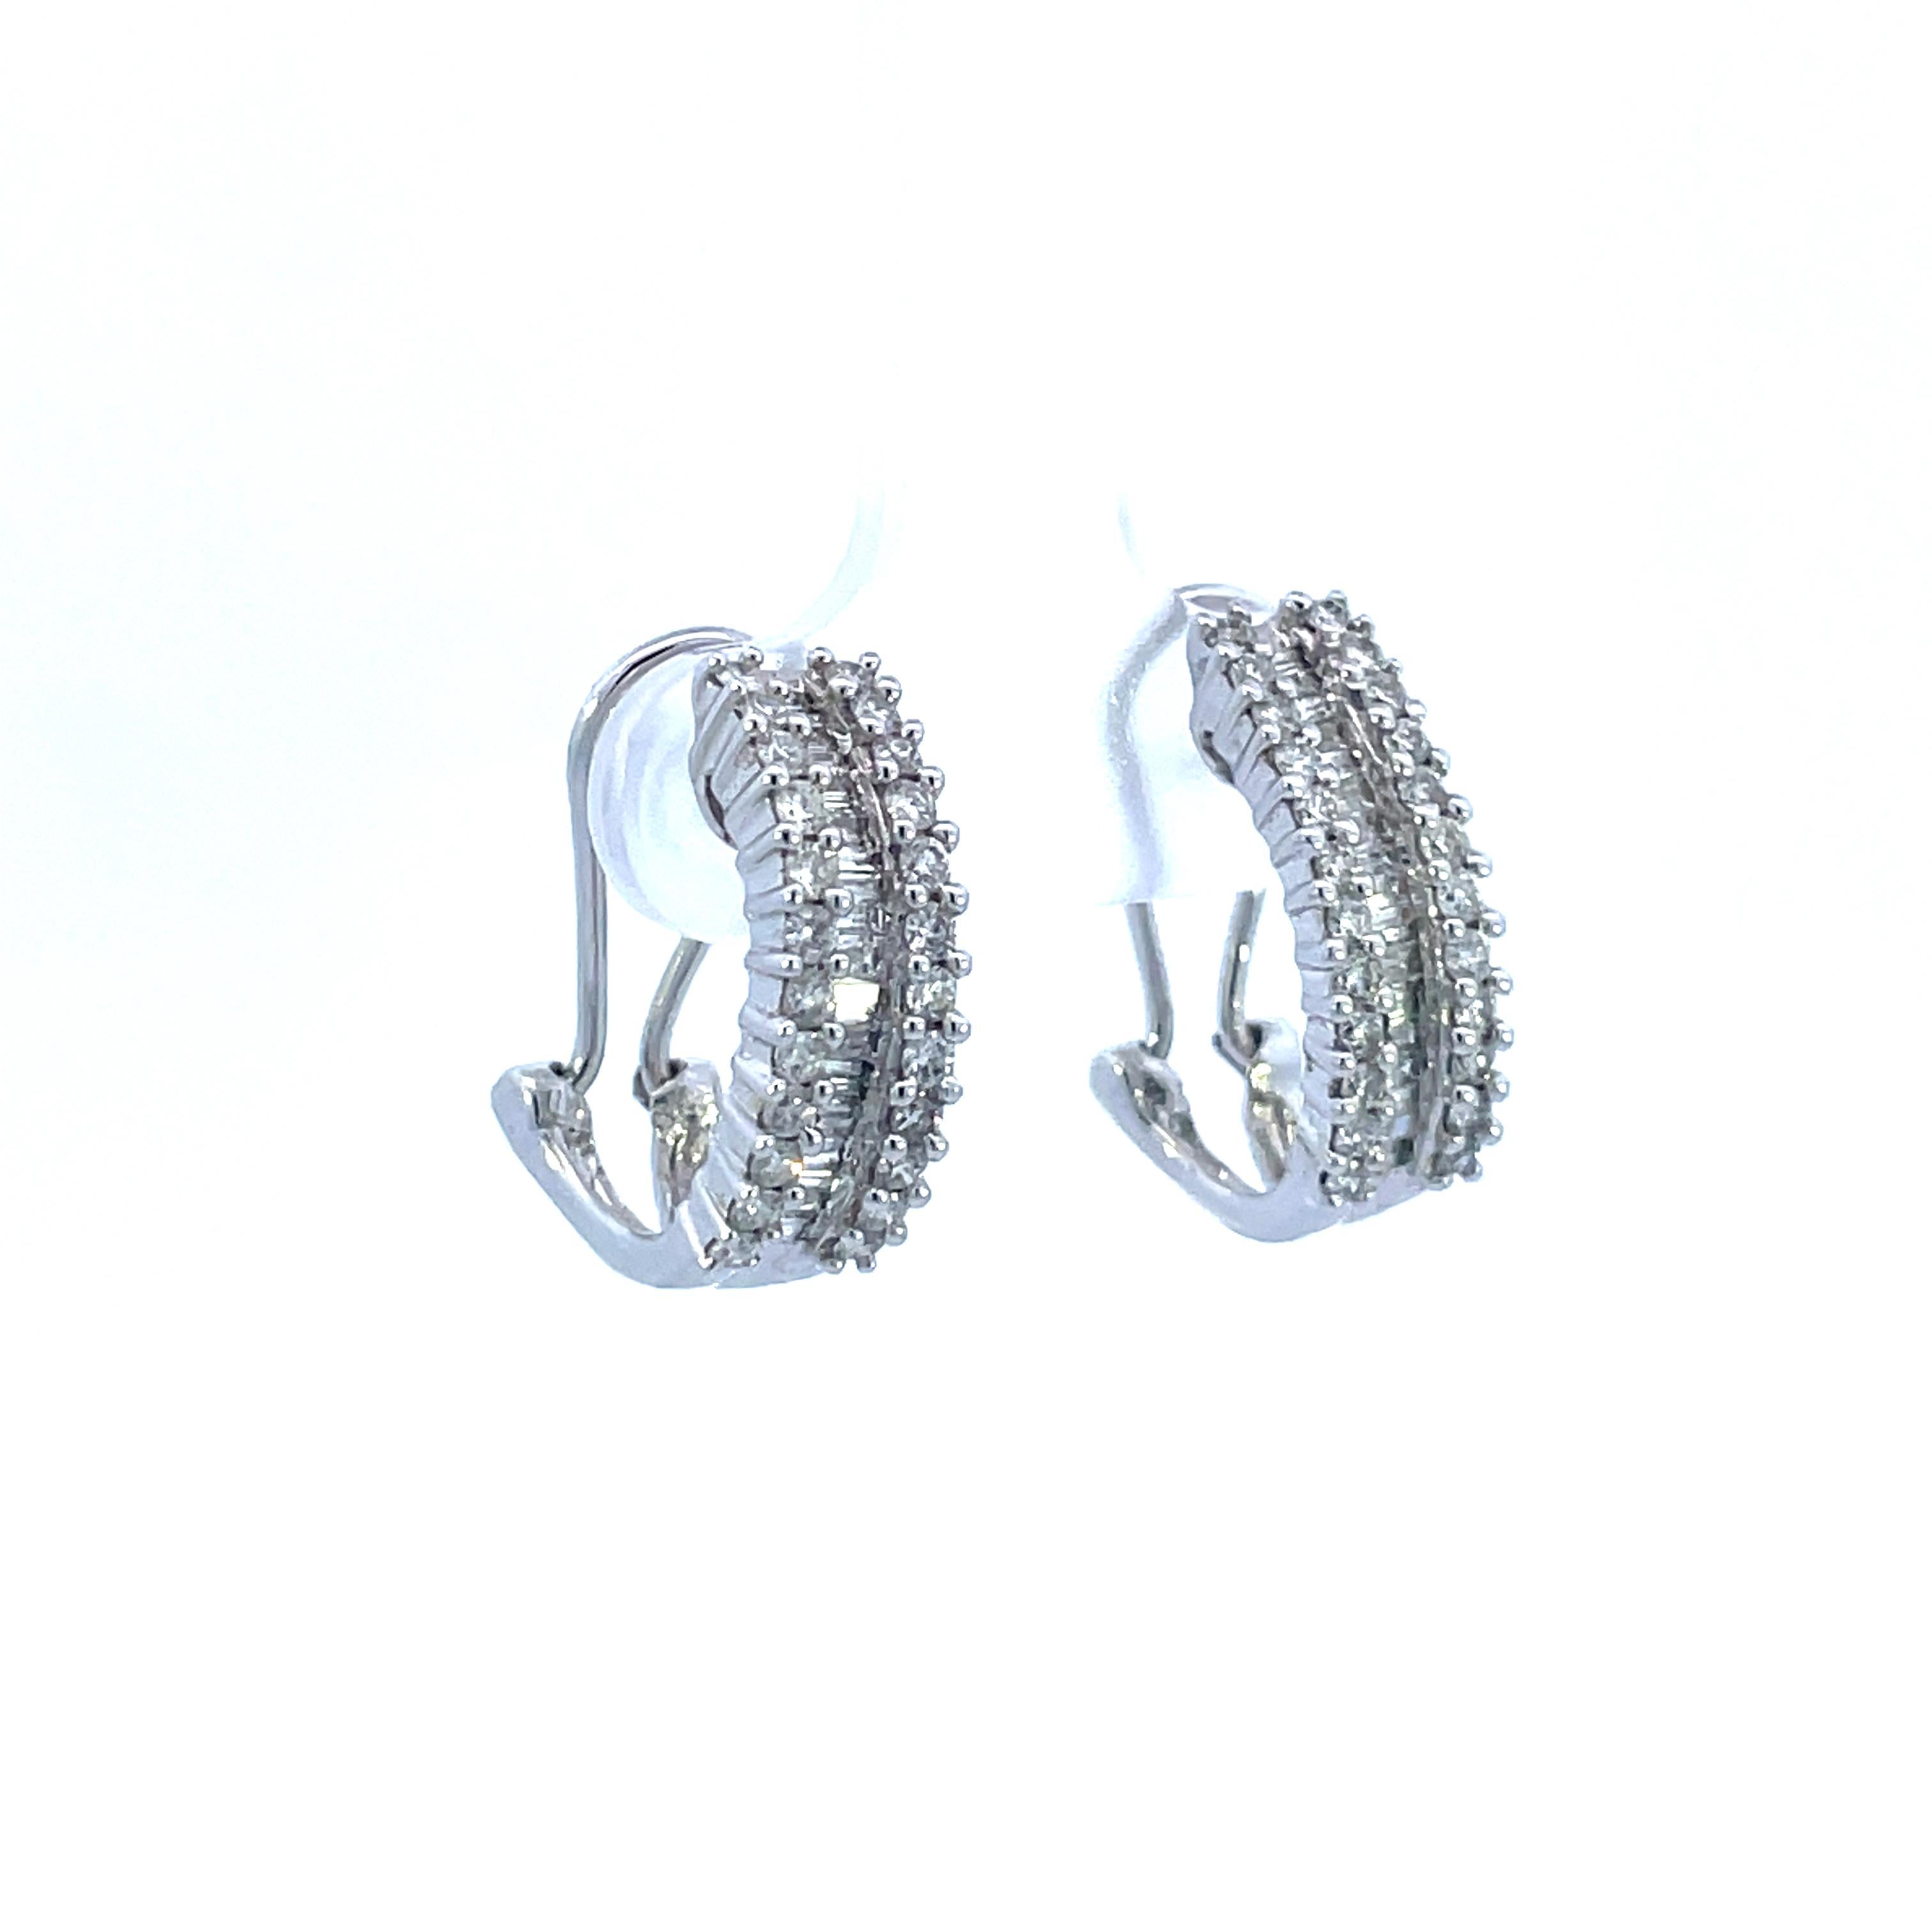 Contemporary 14K White Gold Diamond Omega Back Post Earrings  In Excellent Condition For Sale In Lexington, KY